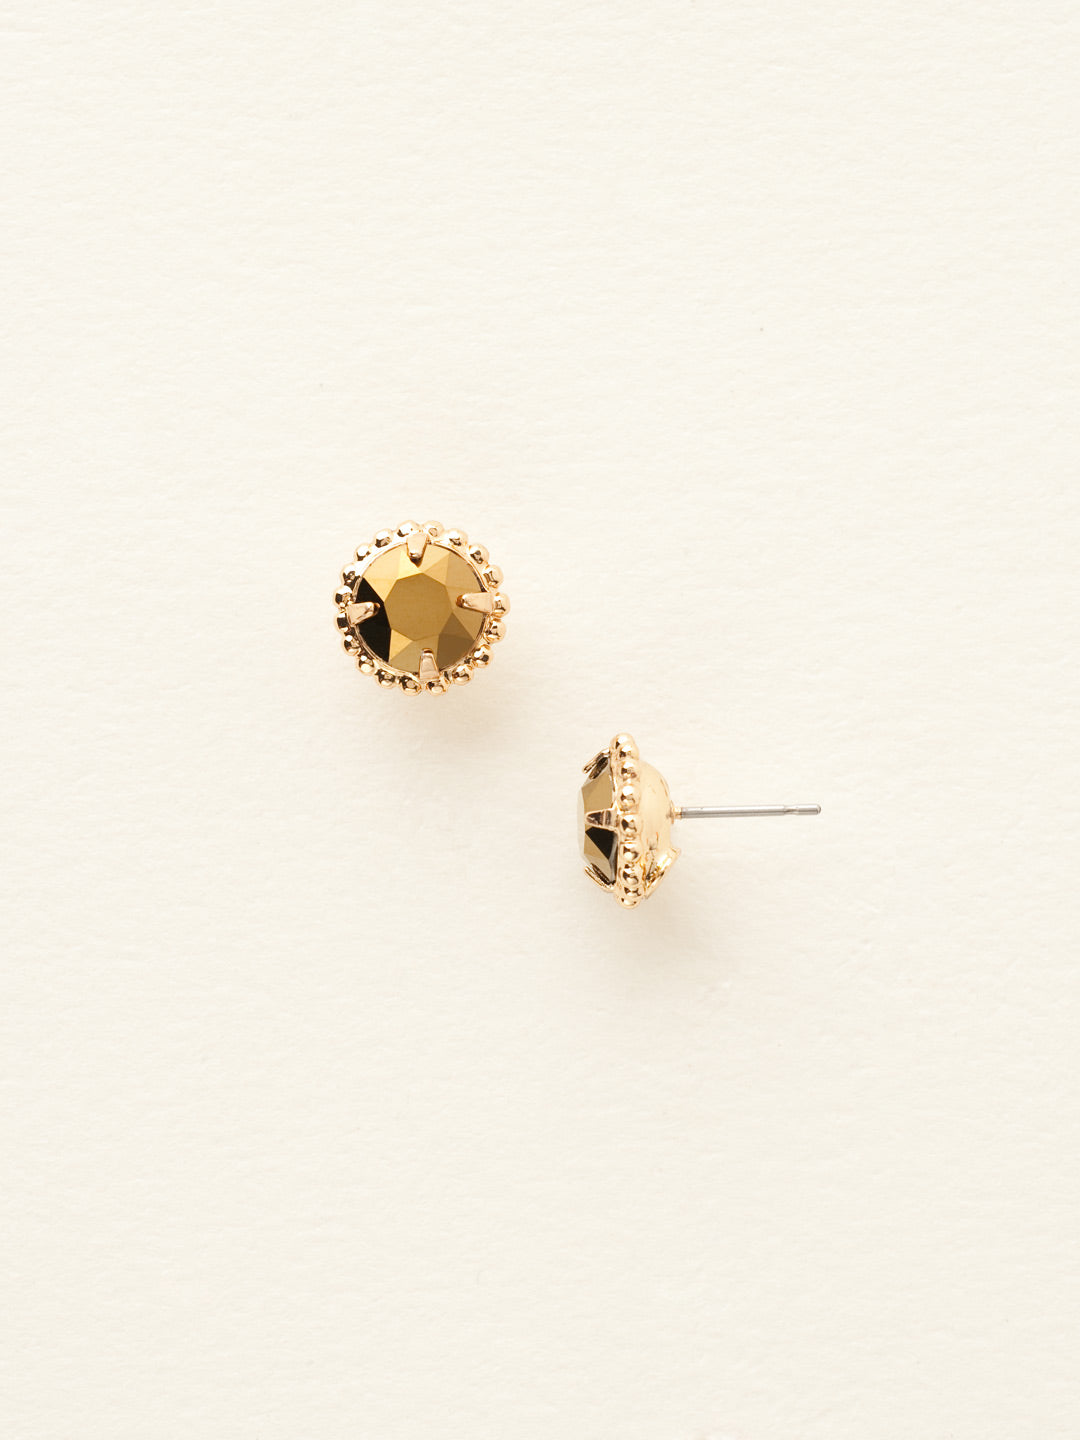 Simplicity Stud Earrings - EBY38BGDO - <p>A timeless classic, the Simplicity Stud Earrings feature round cut crystals in a variety of colors; accented with a halo of metal beaded detail. Need help picking a stud? <a href="https://www.sorrelli.com/blogs/sisterhood/round-stud-earrings-101-a-rundown-of-sizes-styles-and-sparkle">Check out our size guide!</a> From Sorrelli's Dorado collection in our Bright Gold-tone finish.</p>